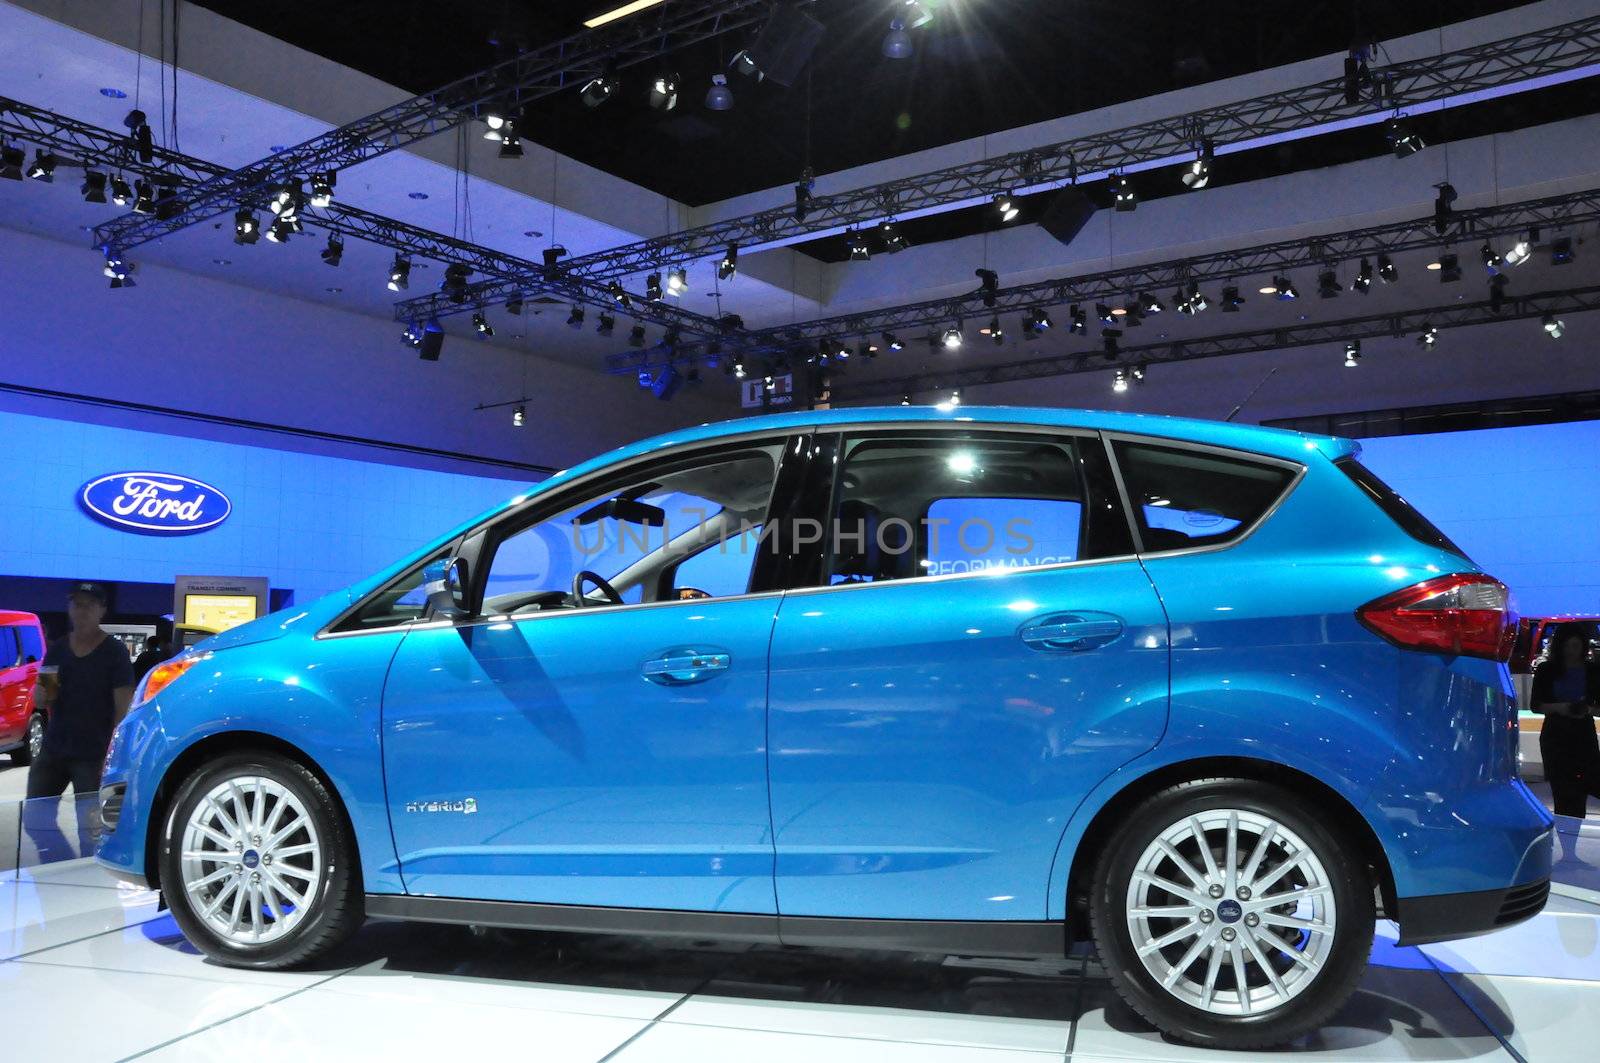 Ford C-Max Hybrid at Auto Show